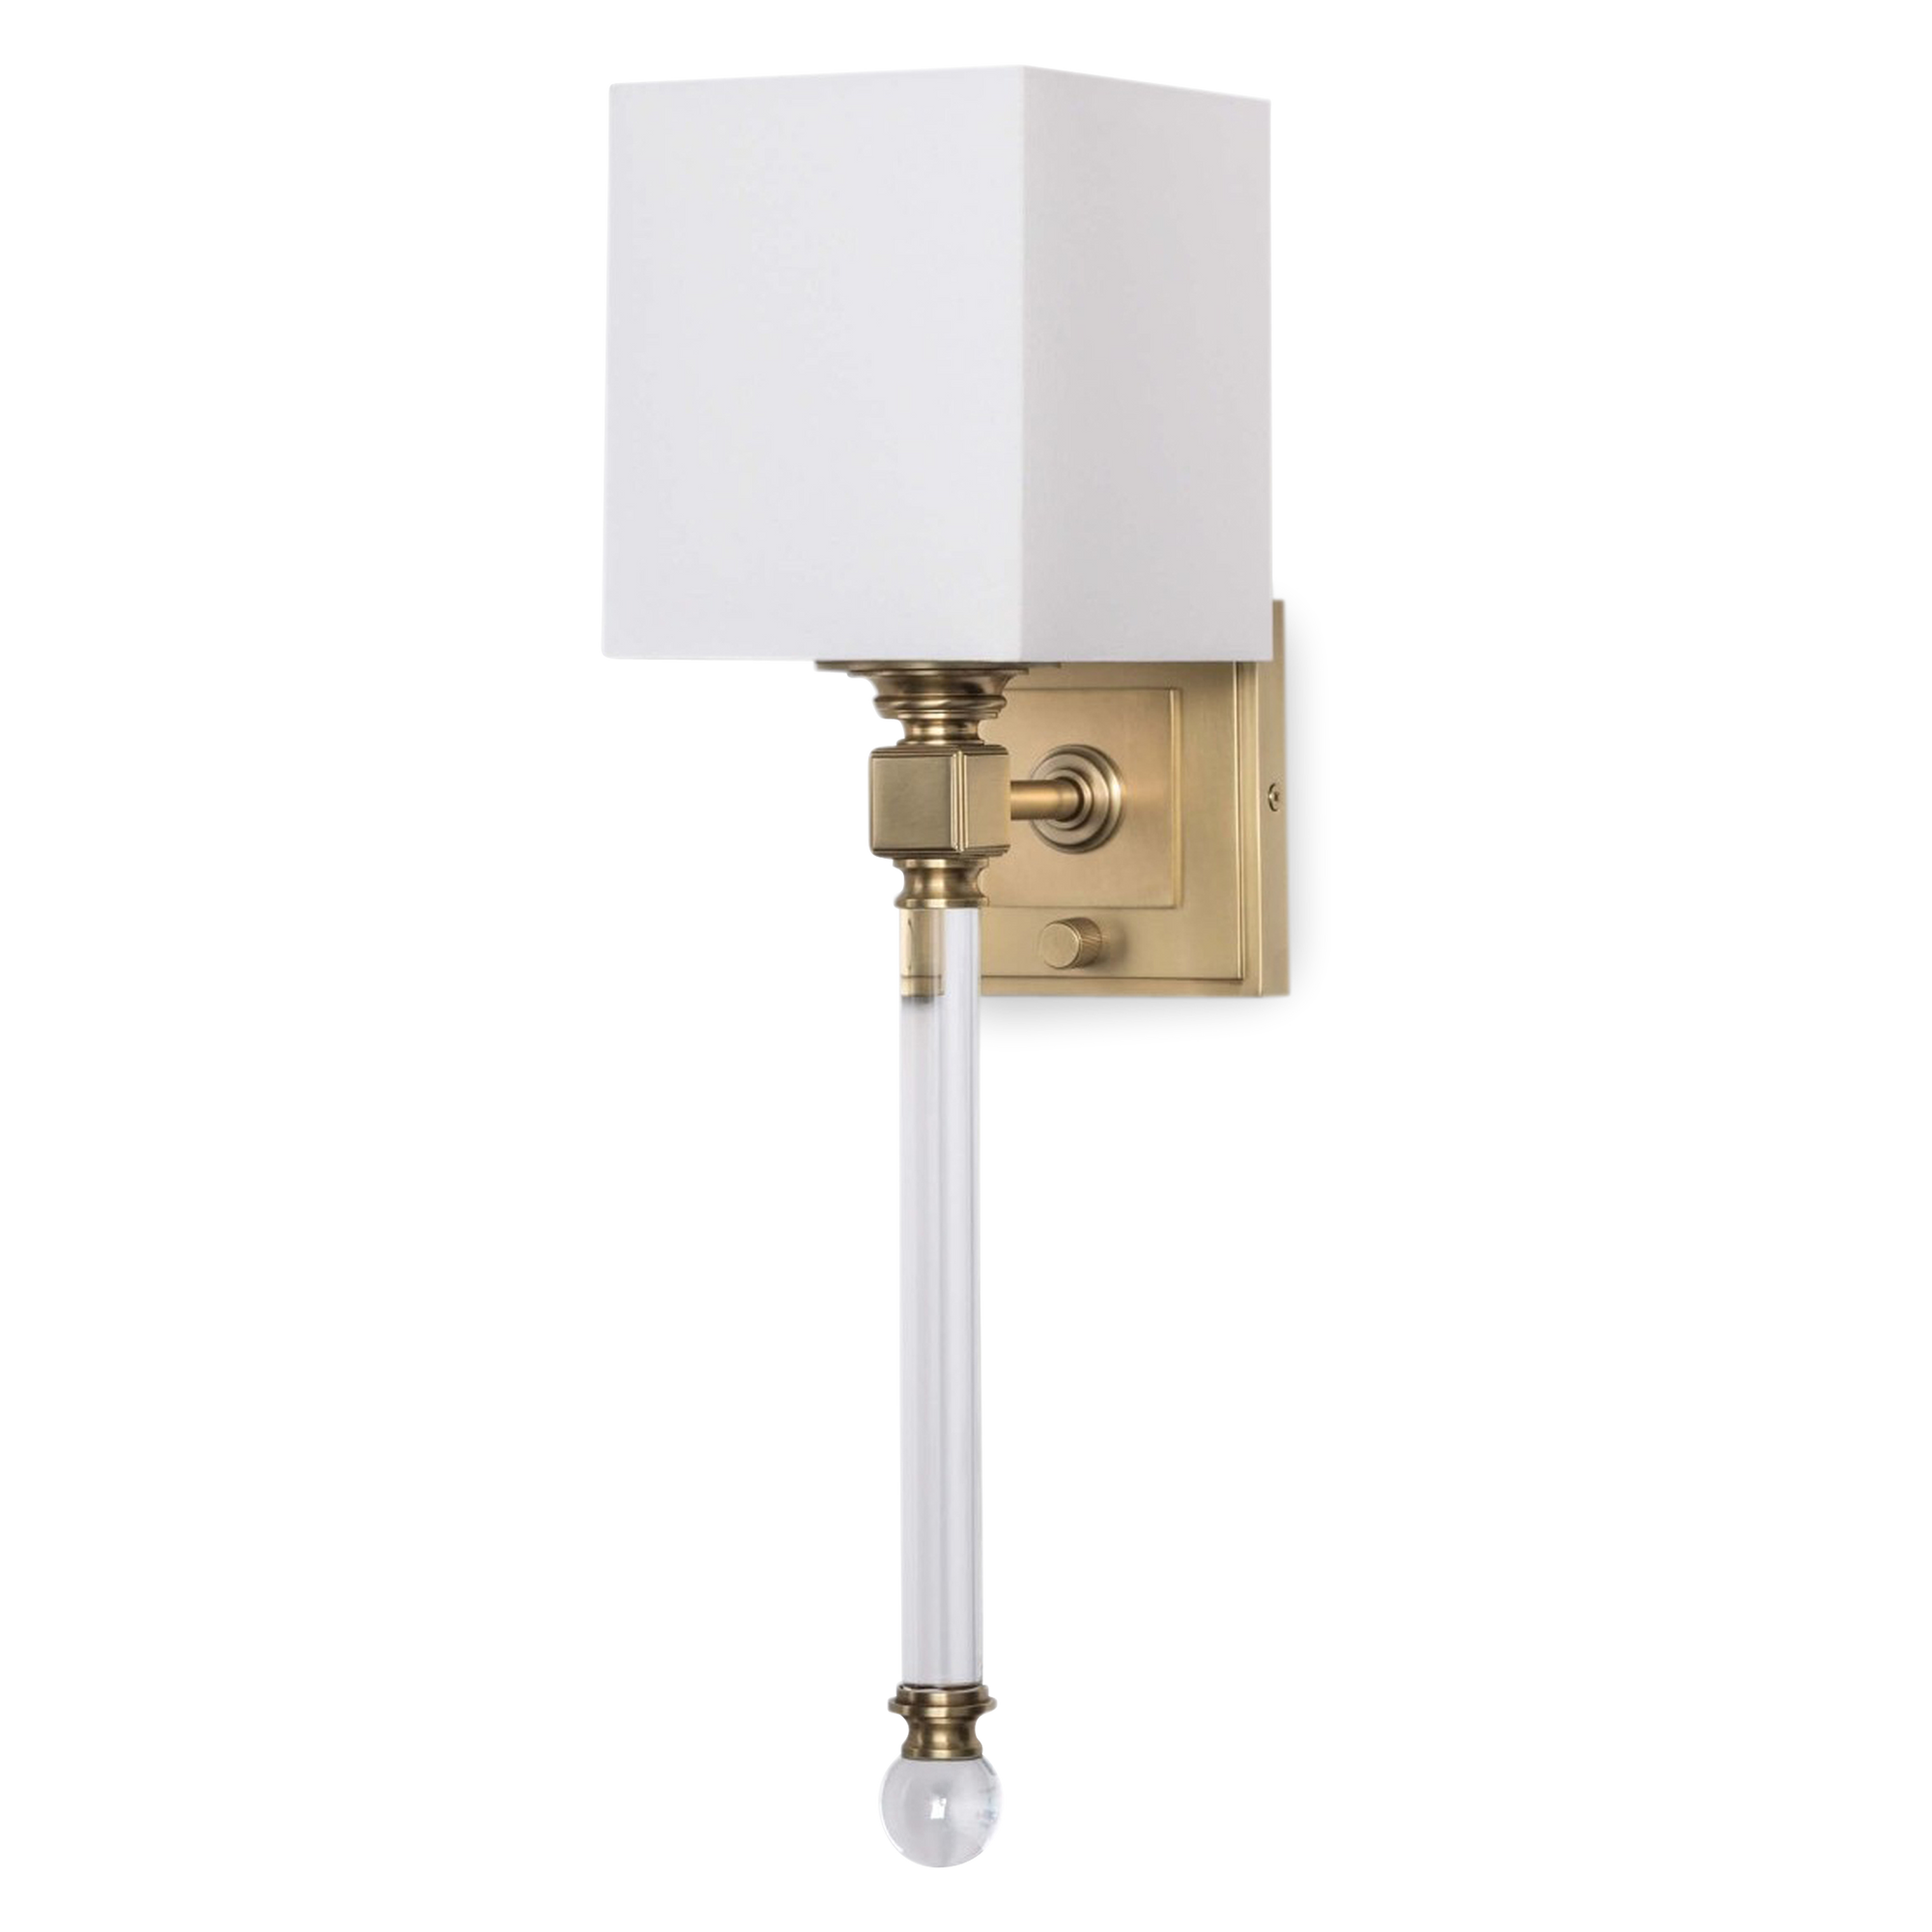 A modern wall light featuring an elongated column in clear acrylic complemented by natural brass detailing and a square shade.